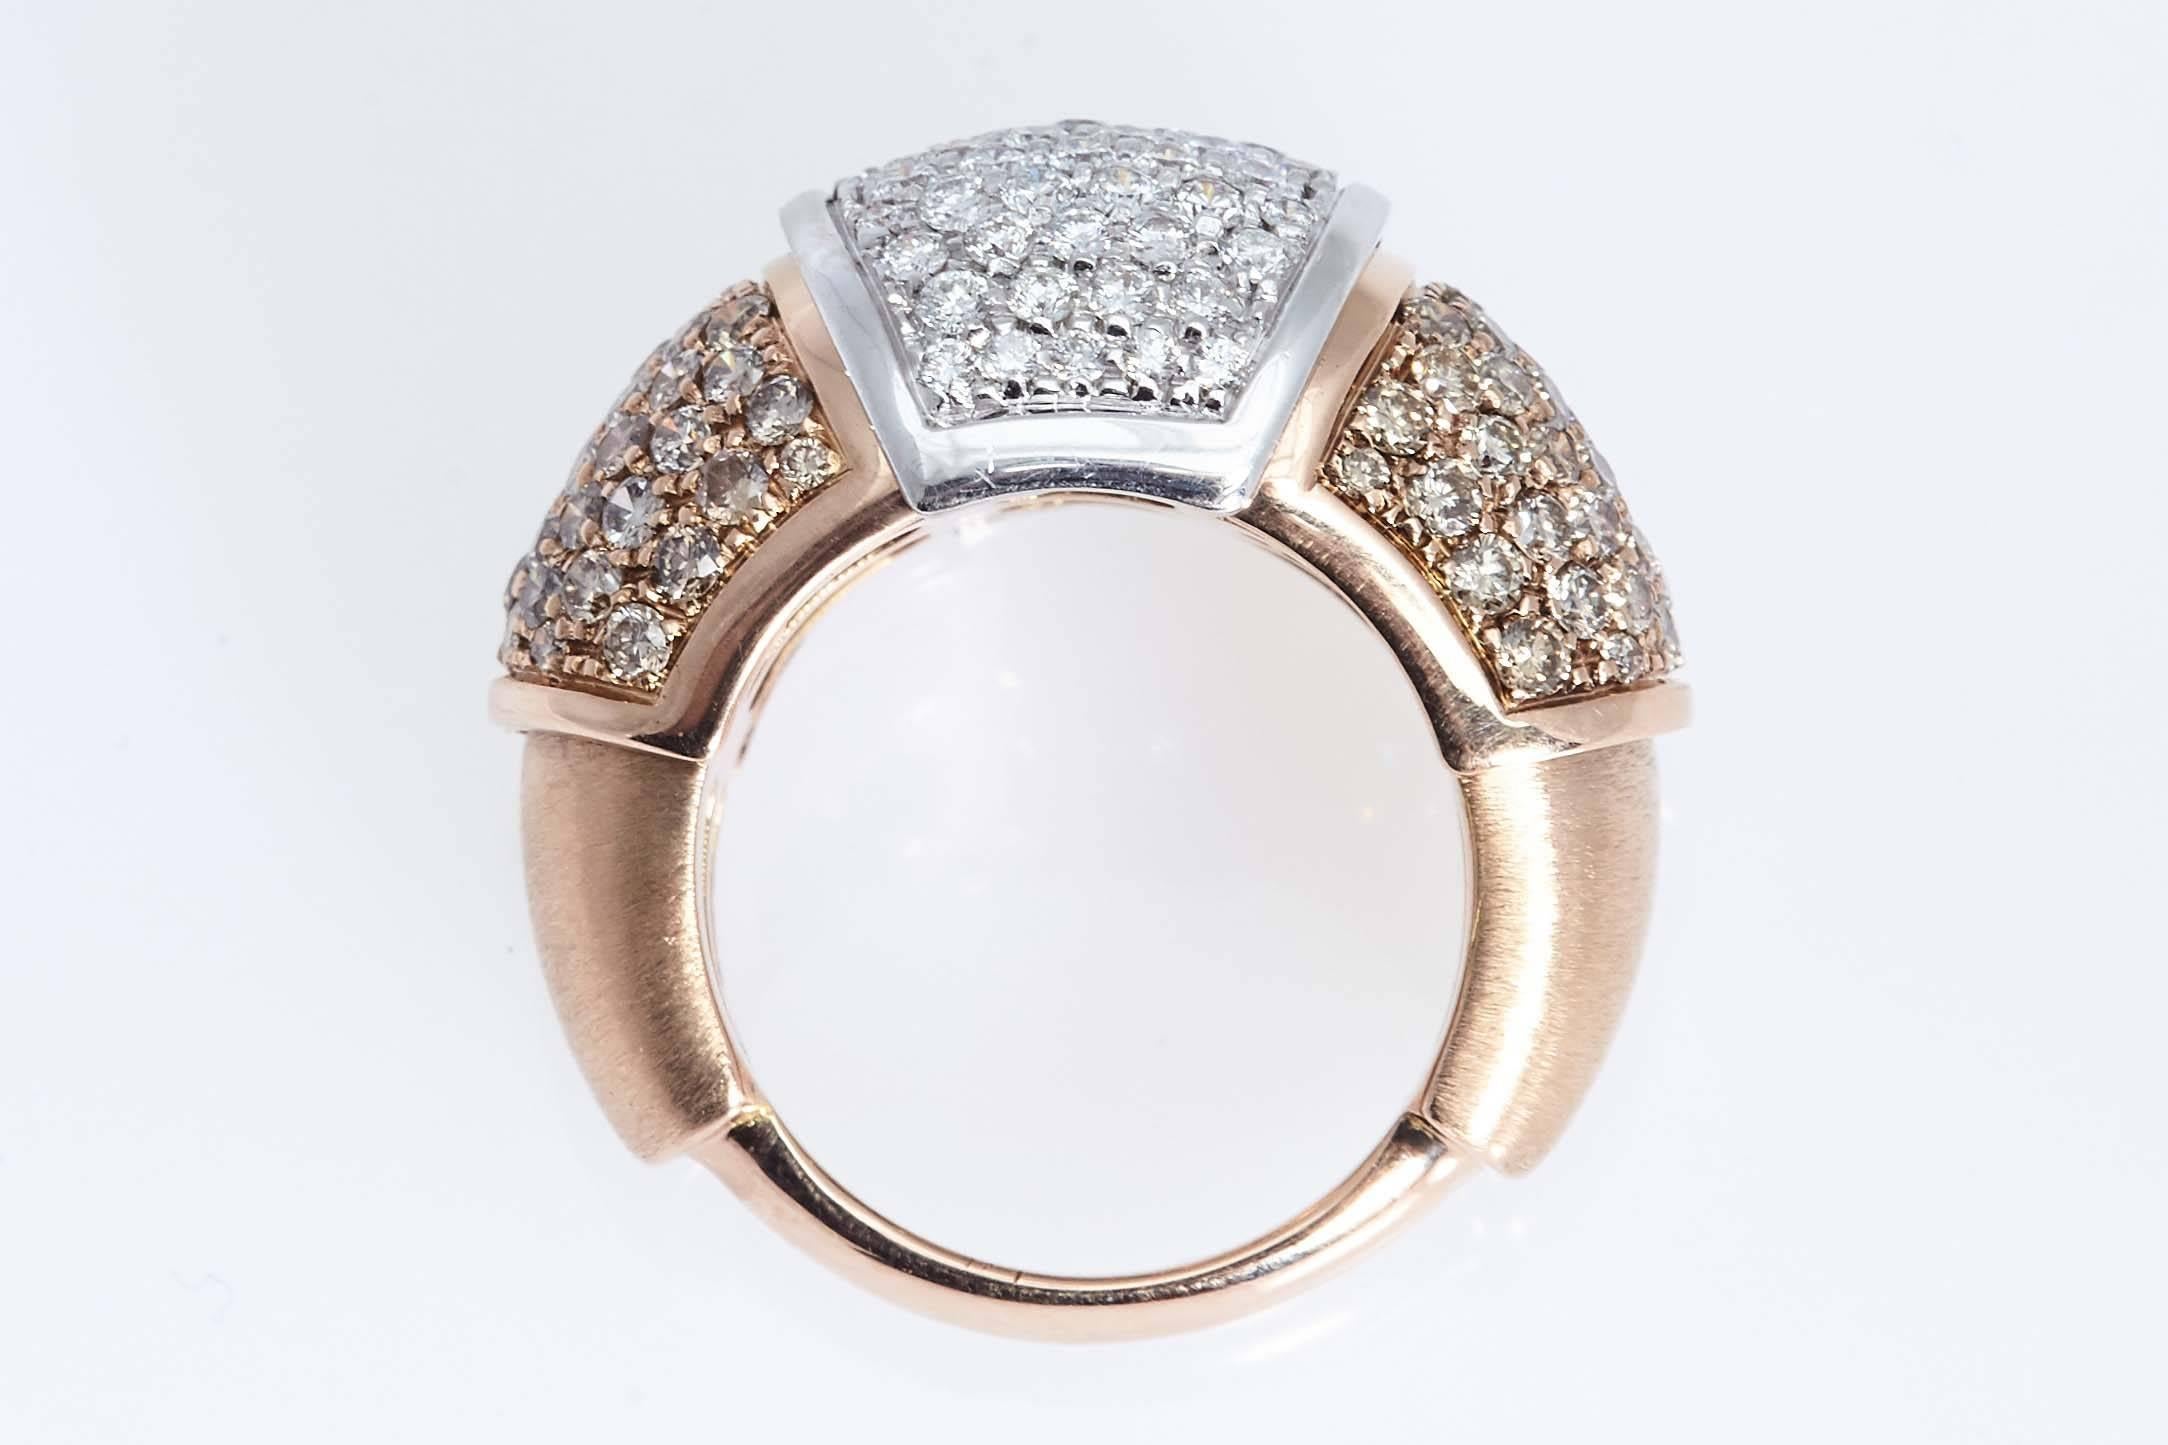 White and brown diamond ring mounted in 18 karat pink and white gold. The ring contains a total of 3.19 carats, made up of  1.18 carats of white diamonds and 2.01 carats of brown diamonds. The ring is size 6 1/2.